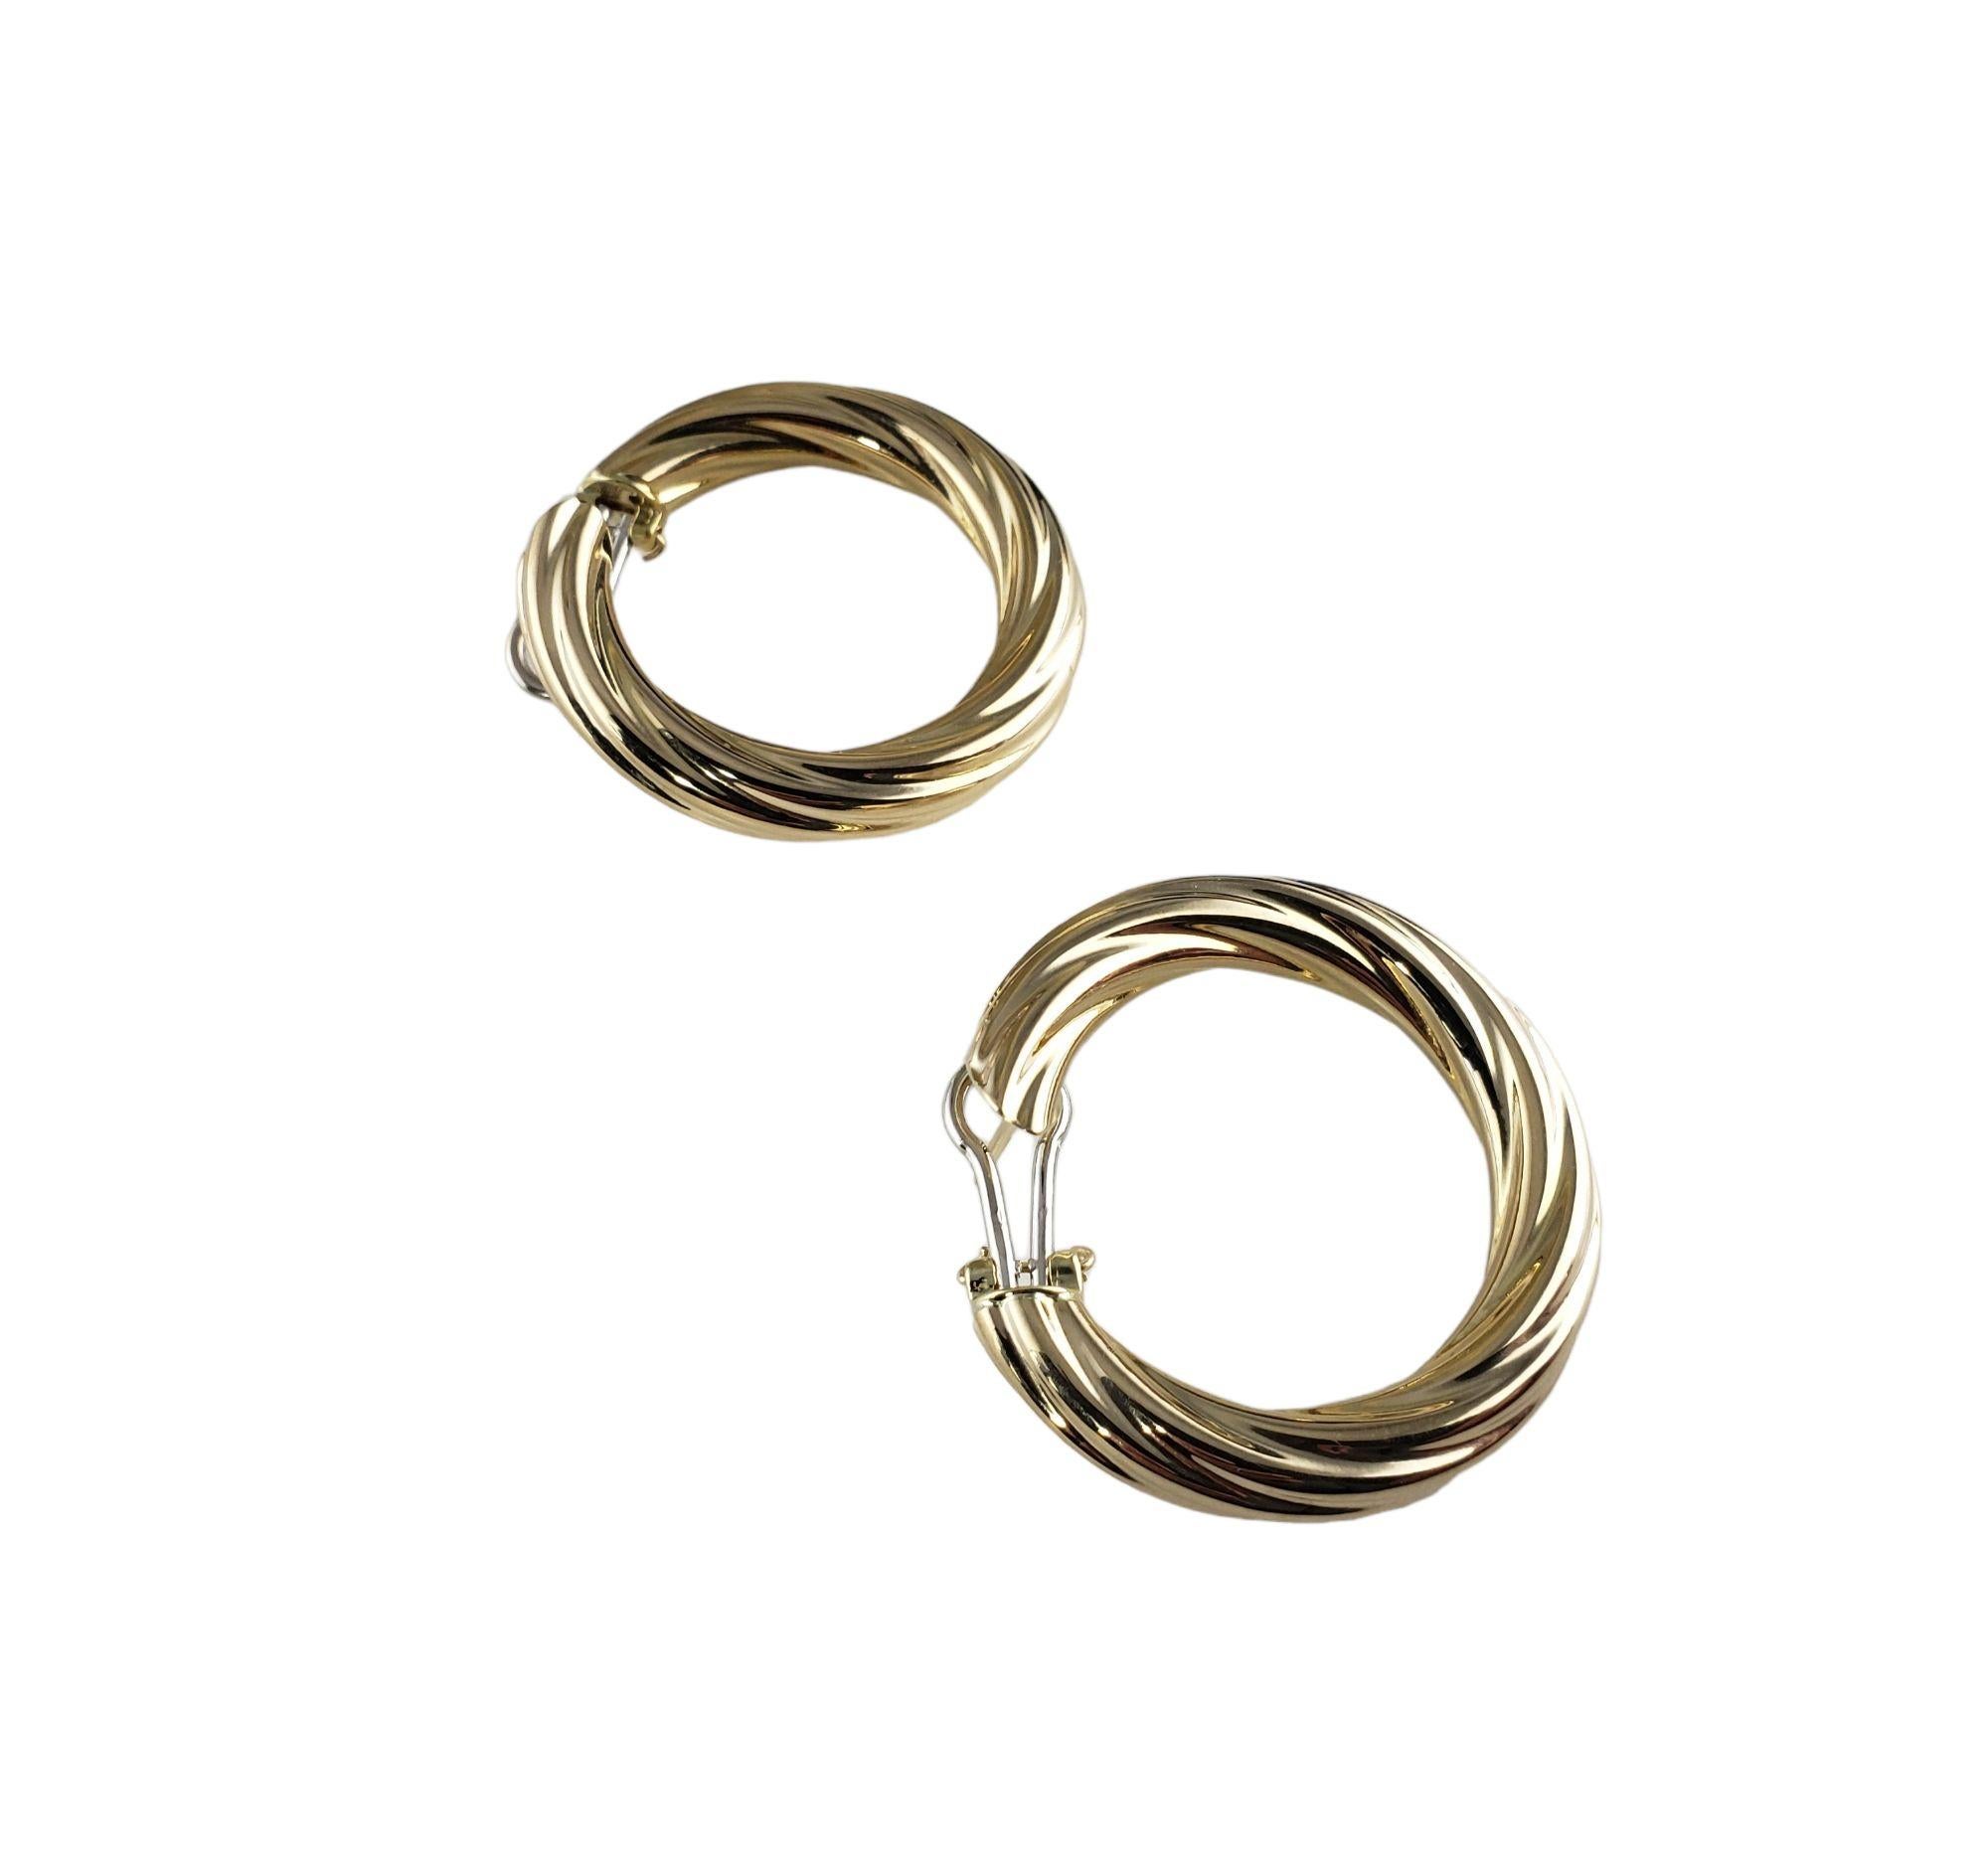 Vintage 14 Karat Yellow Gold Twist Hoop Earrings-

These elegant front-facing hoop earrings are crafted in beautifully detailed 14K yellow gold. Omega back closures.

Size: 34 mm x 6 mm

Weight: 5.4 dwt. / 8.4 gr.

Stamped: UNOAERRE 14K Italy

Very